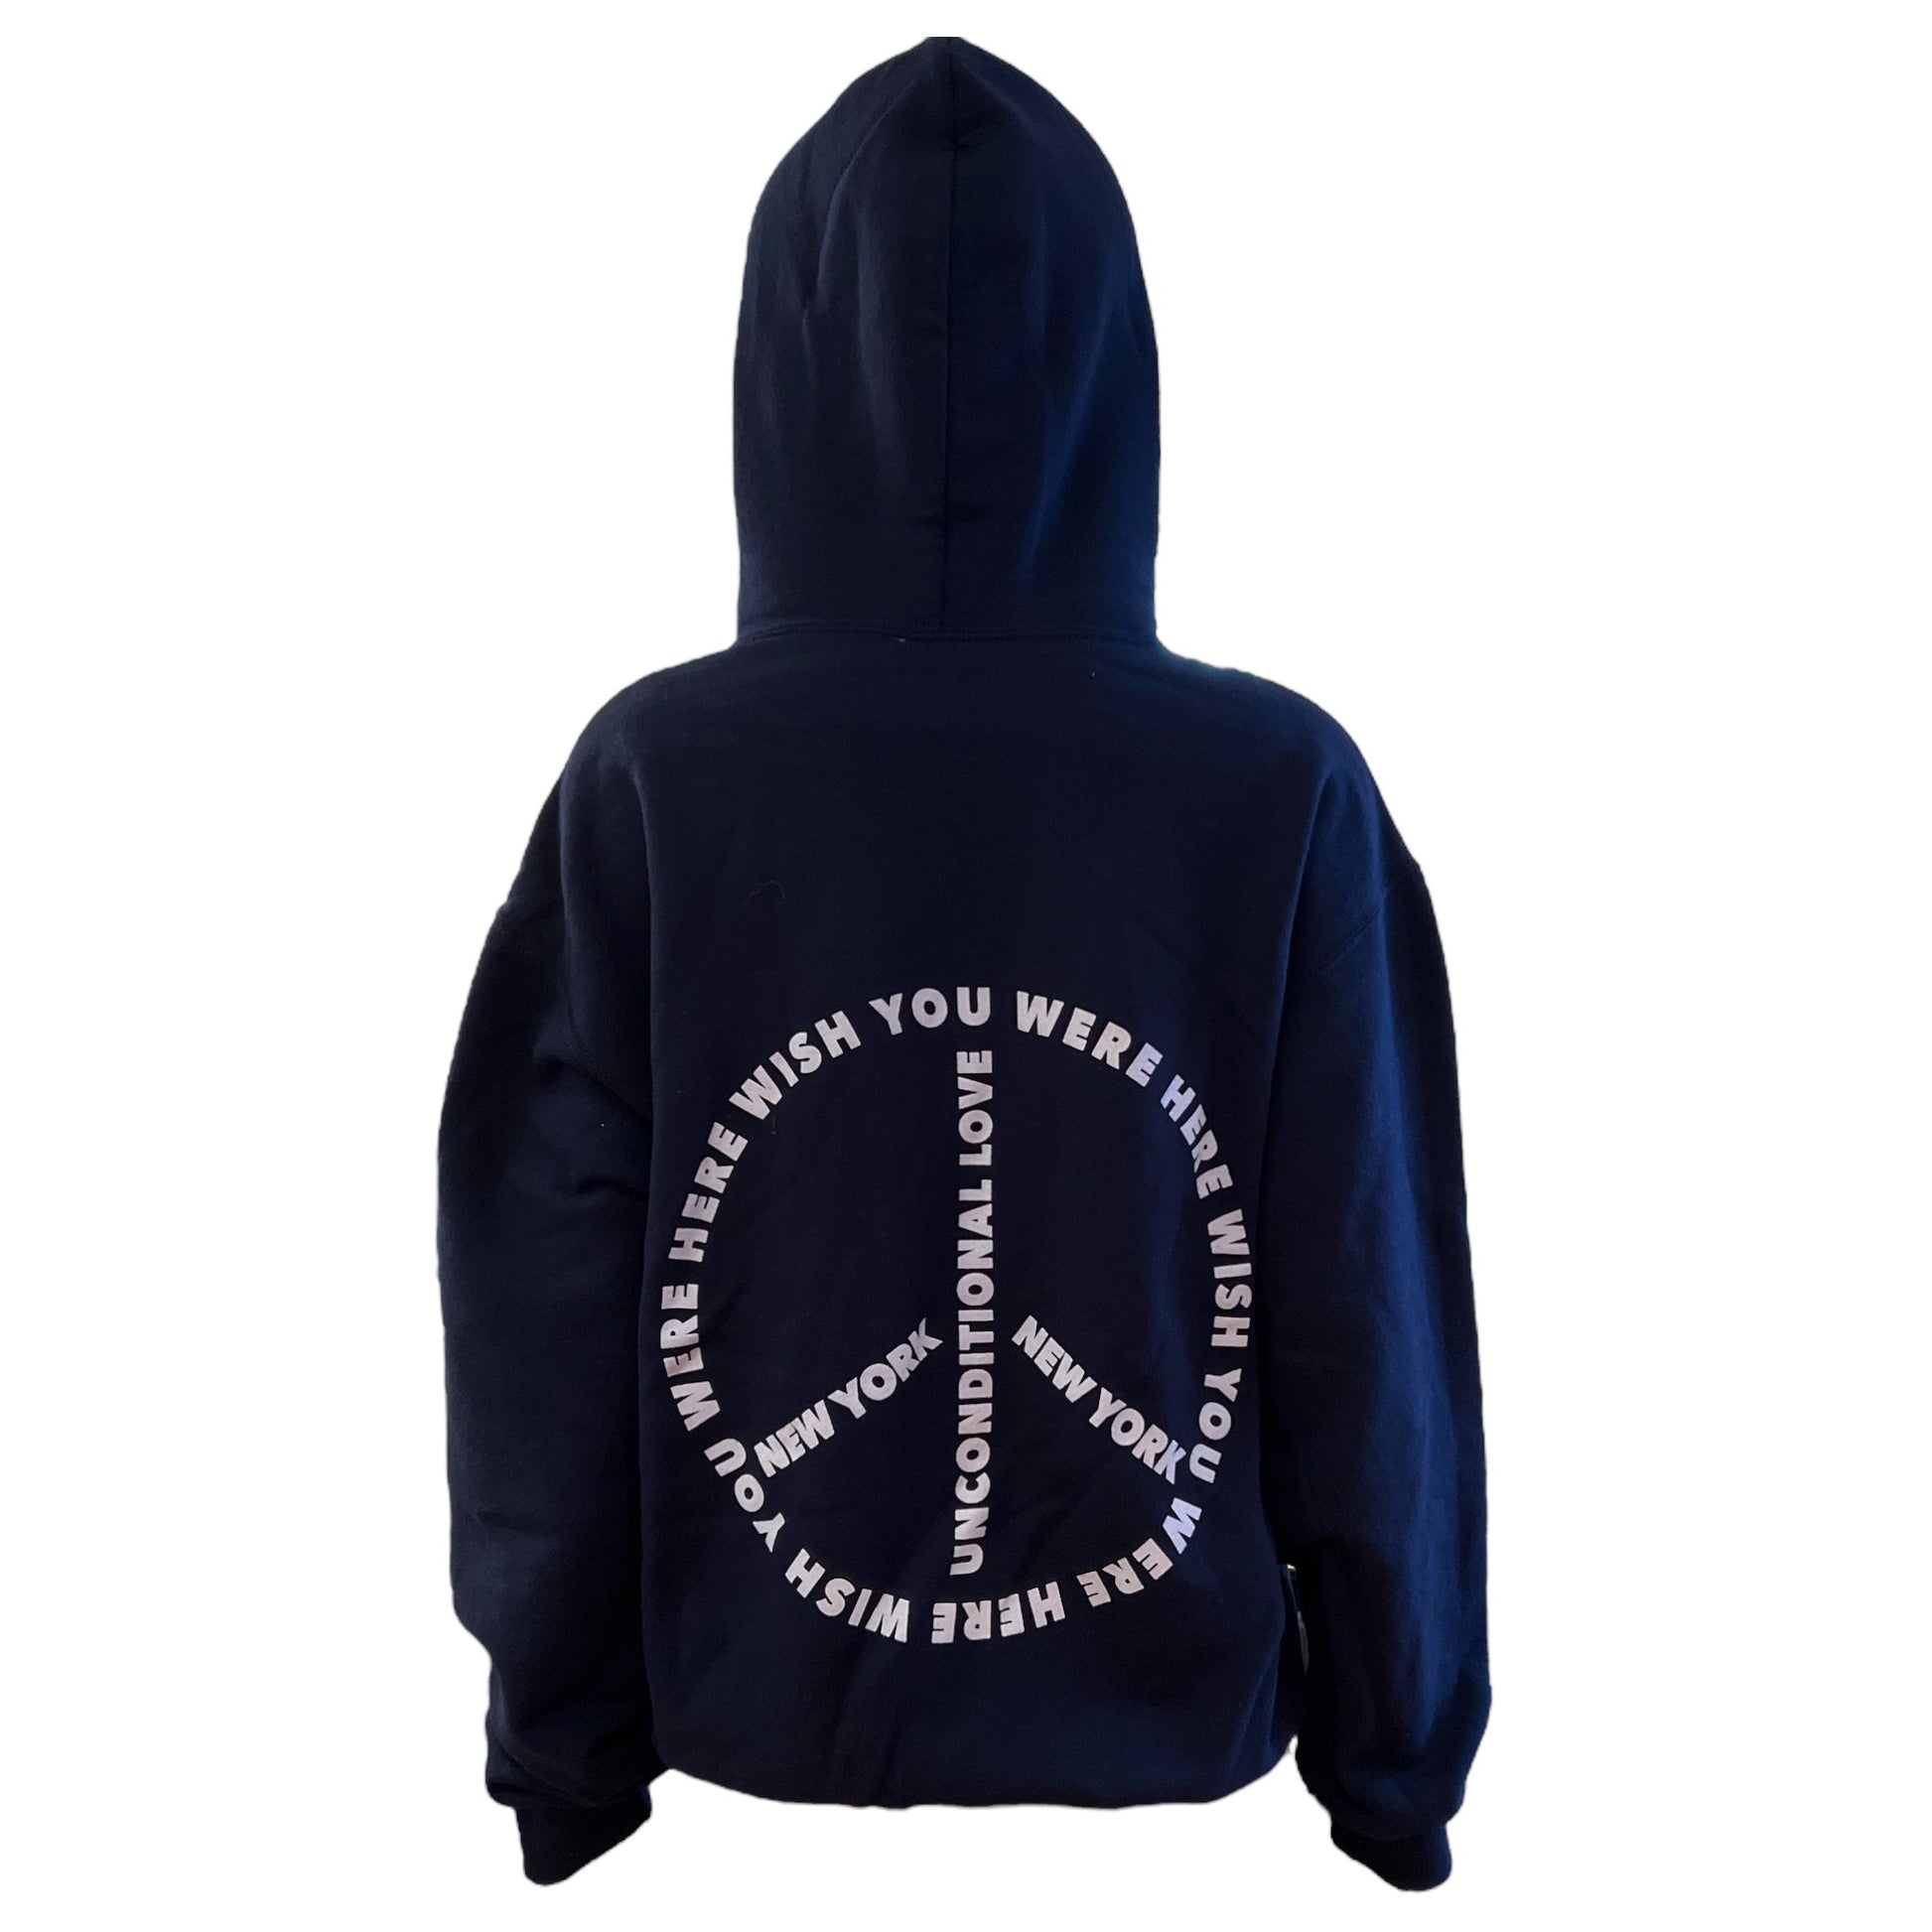 Wish You Were Here Hoodie (navy) - Something about Sofia